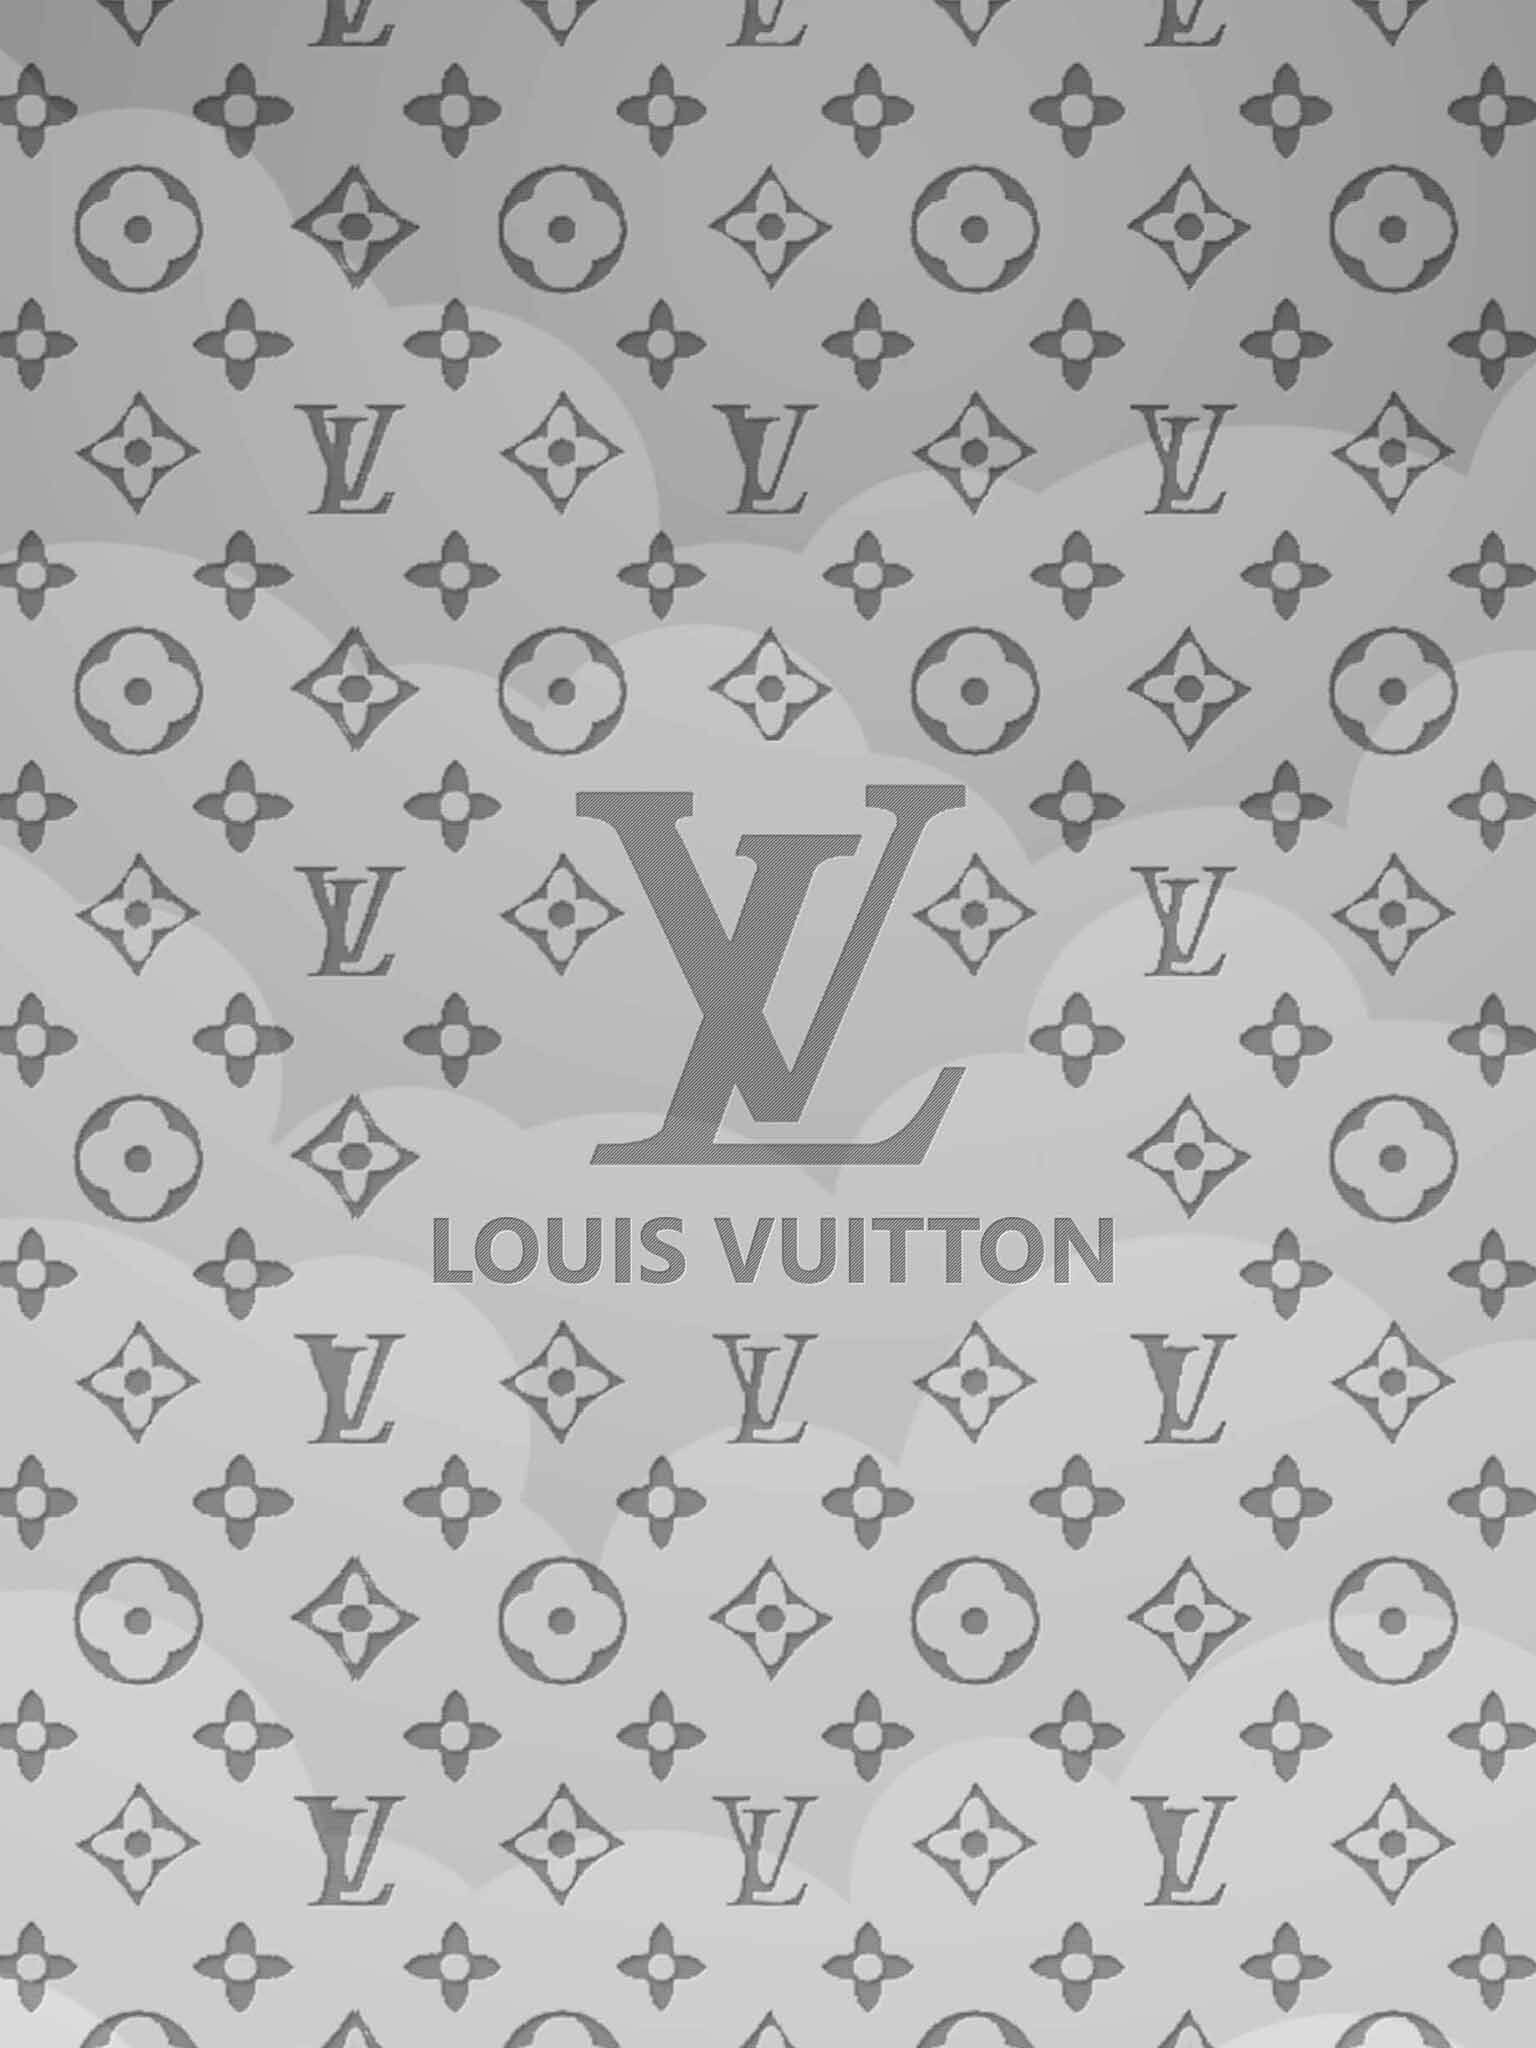 Louis Vuitton: Sets the trends for other luxury brands to follow. 1540x2050 HD Wallpaper.